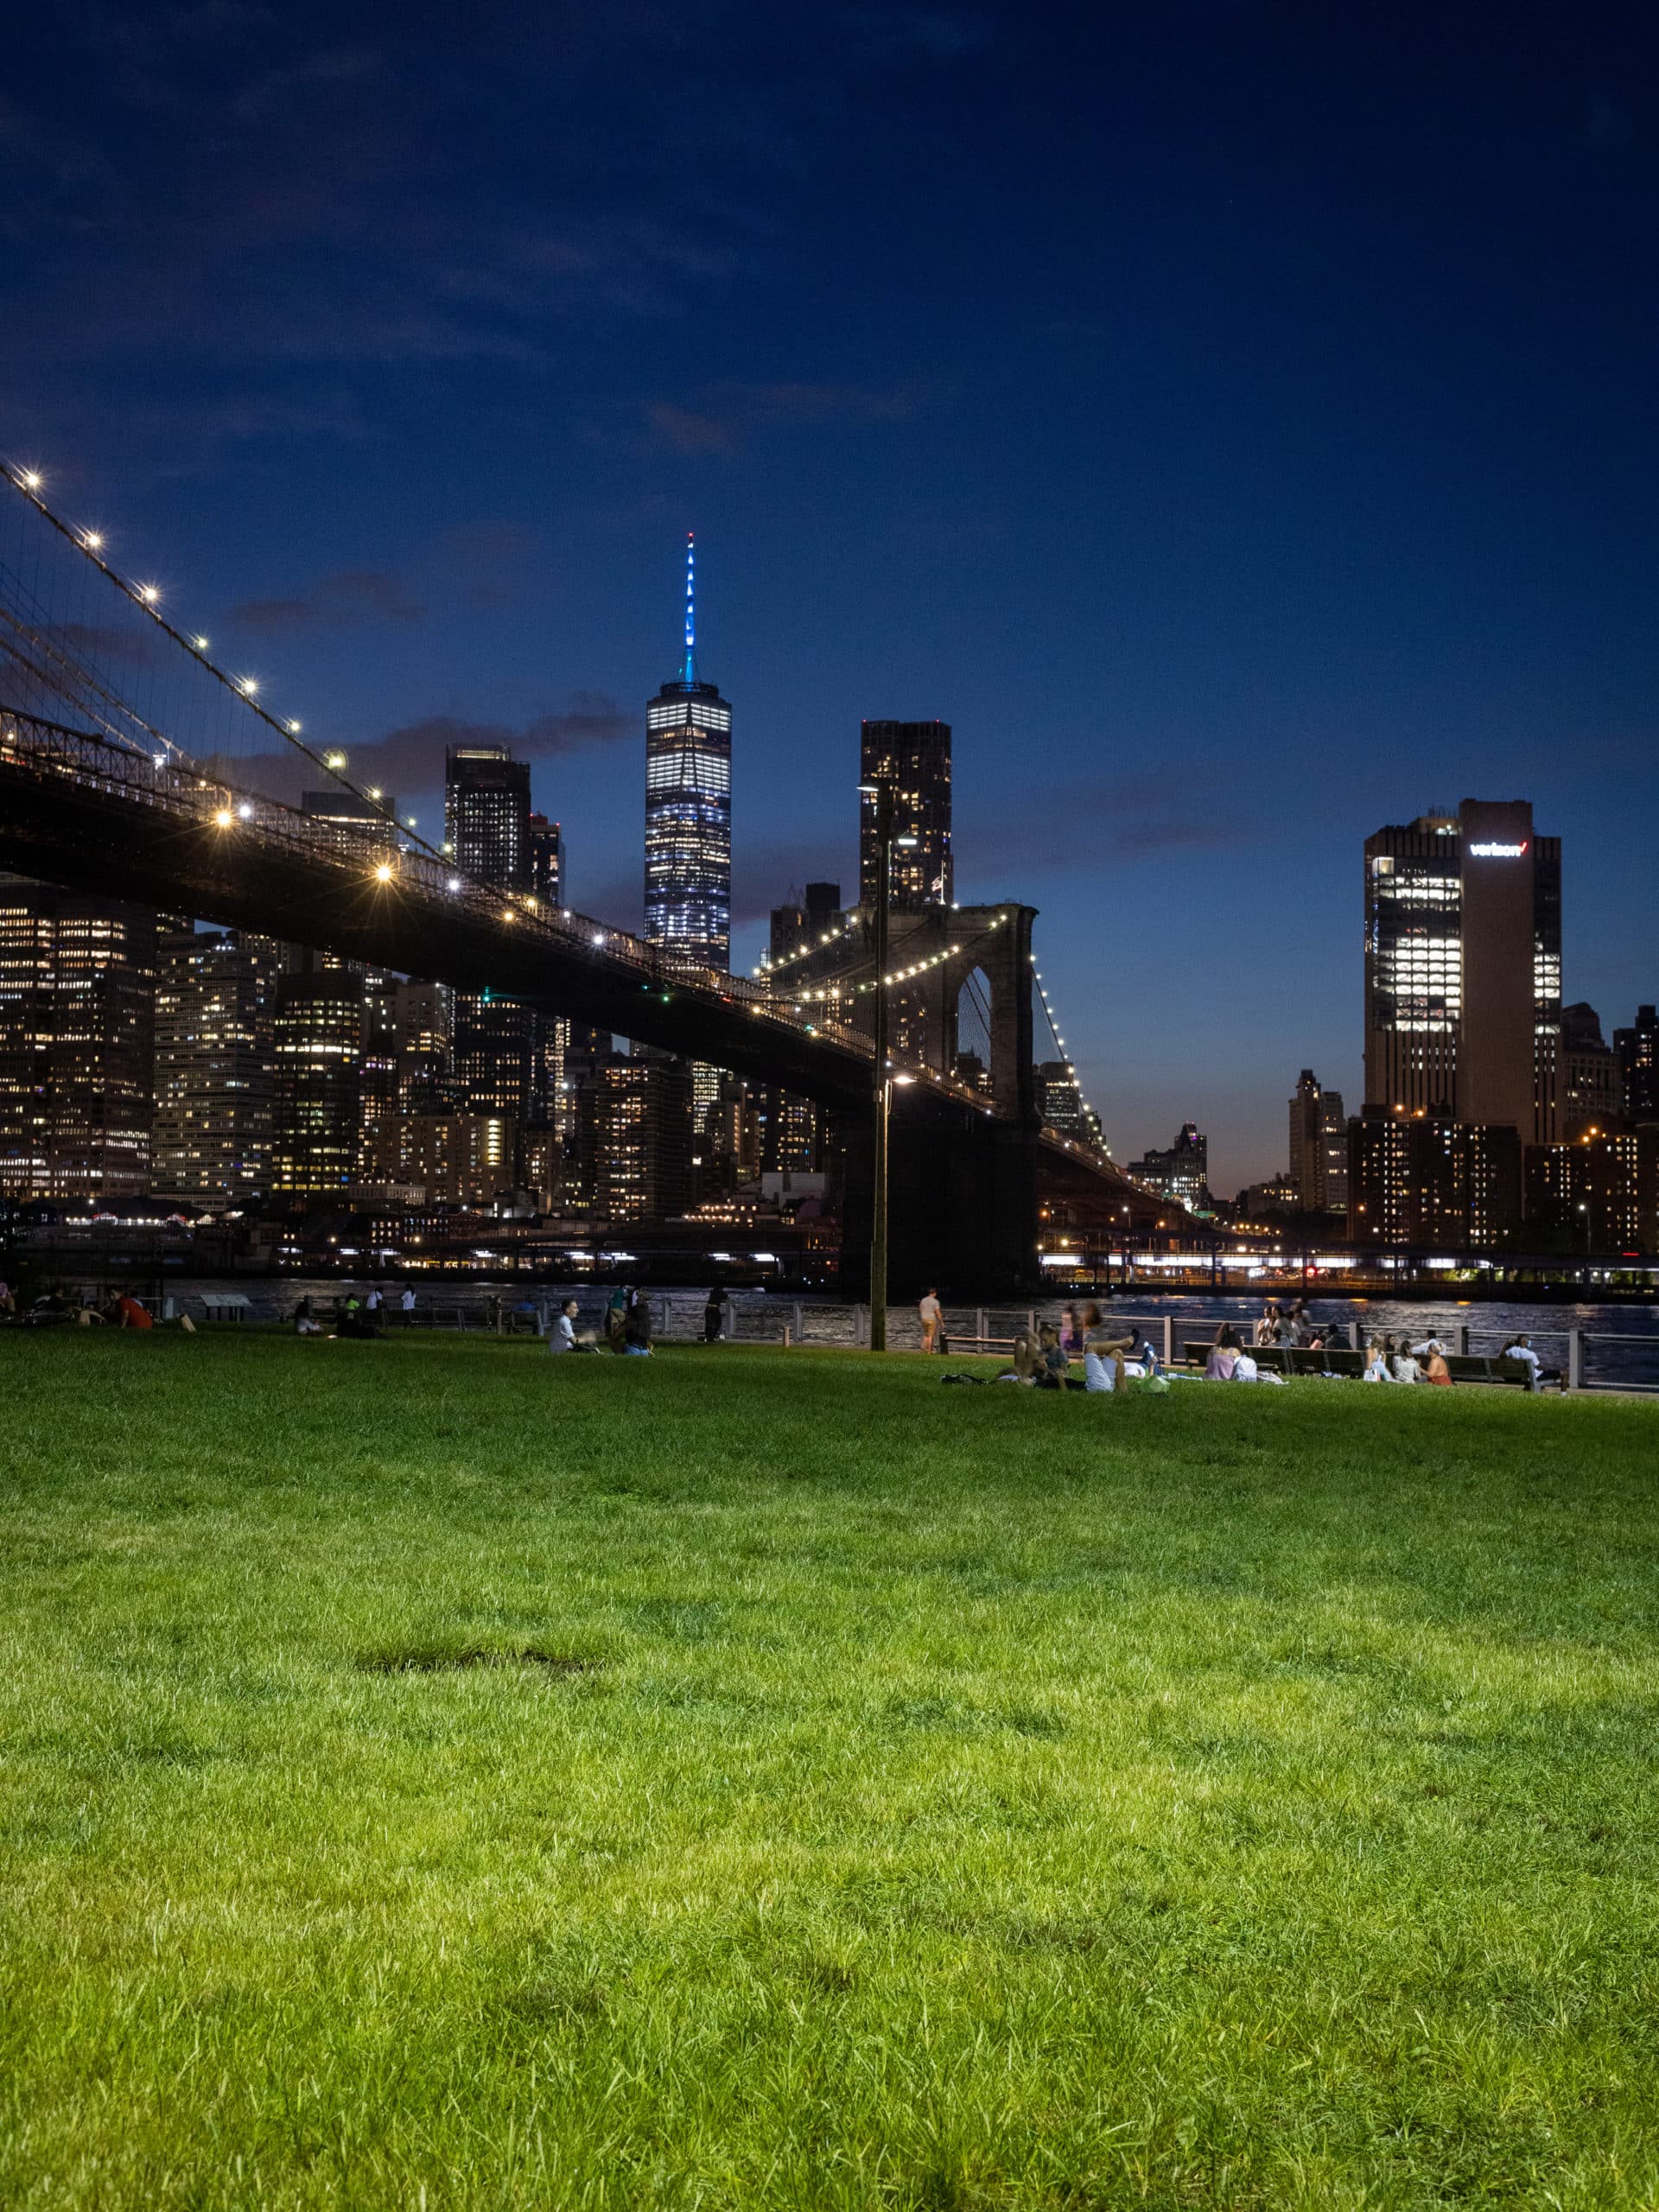 View from the Empire Fulton Ferry Lawn of the Brooklyn Bridge and lower Manhattan at night.